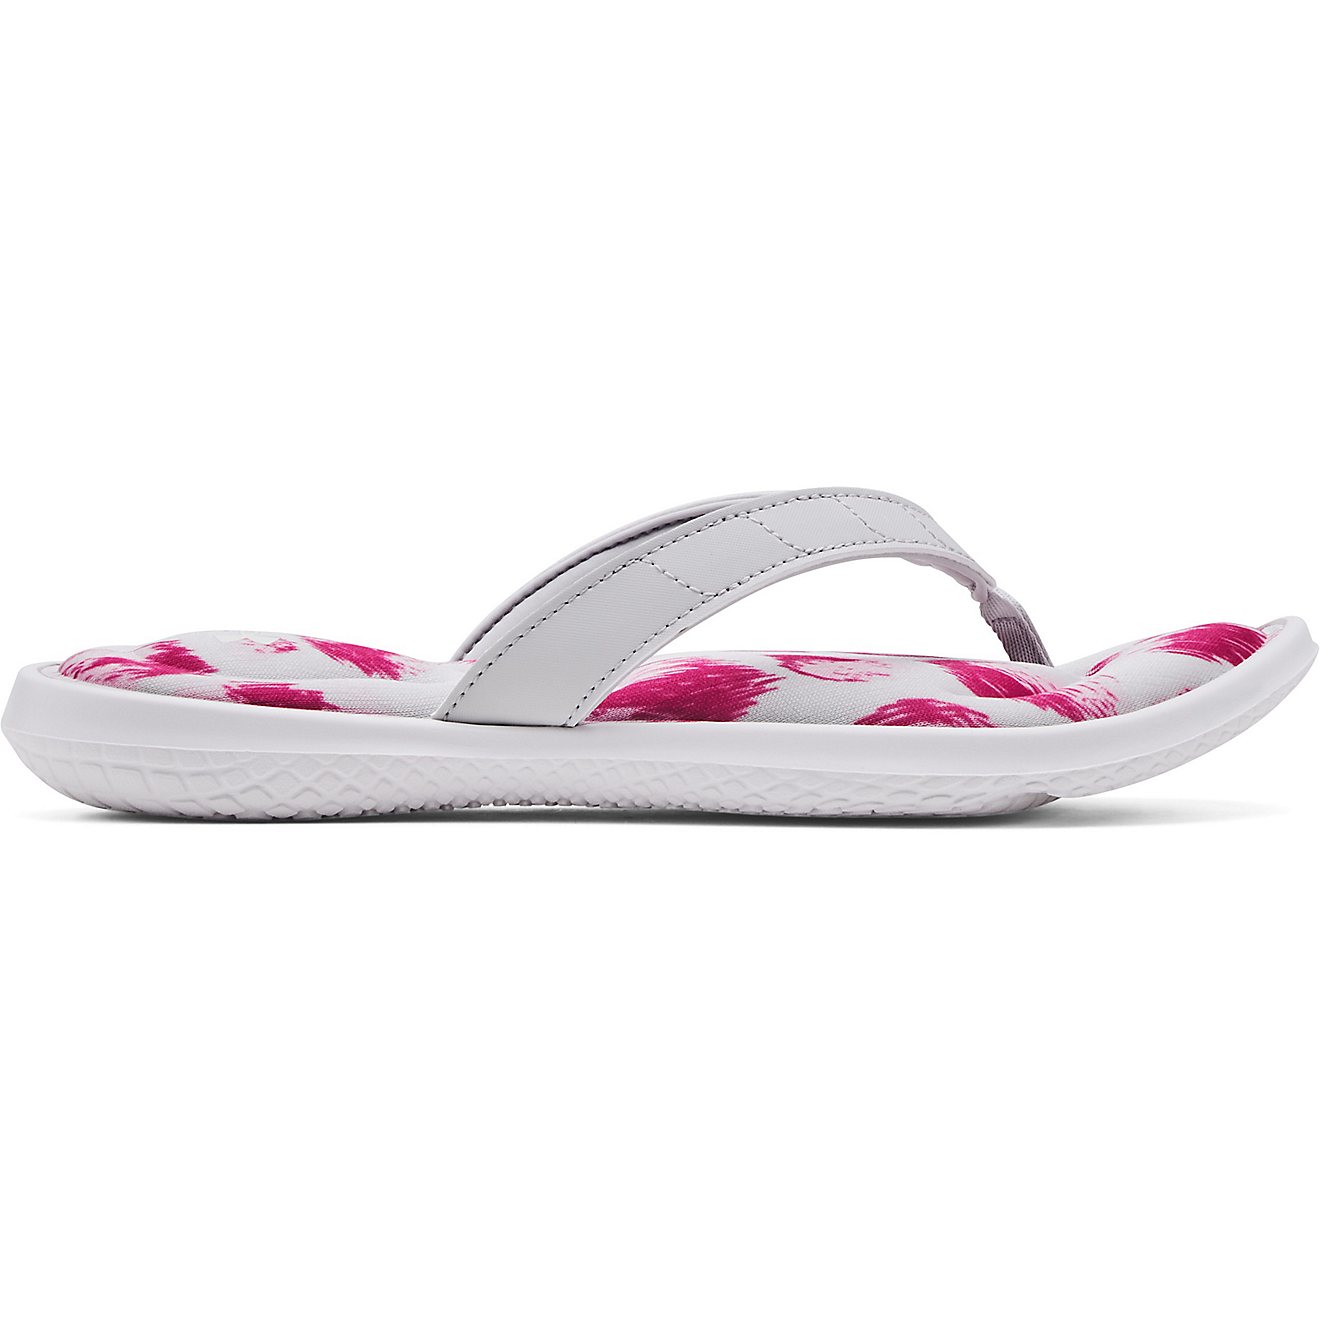 Under Armour Women’s Marbella VII Graphic FB Sandals                                                                           - view number 1